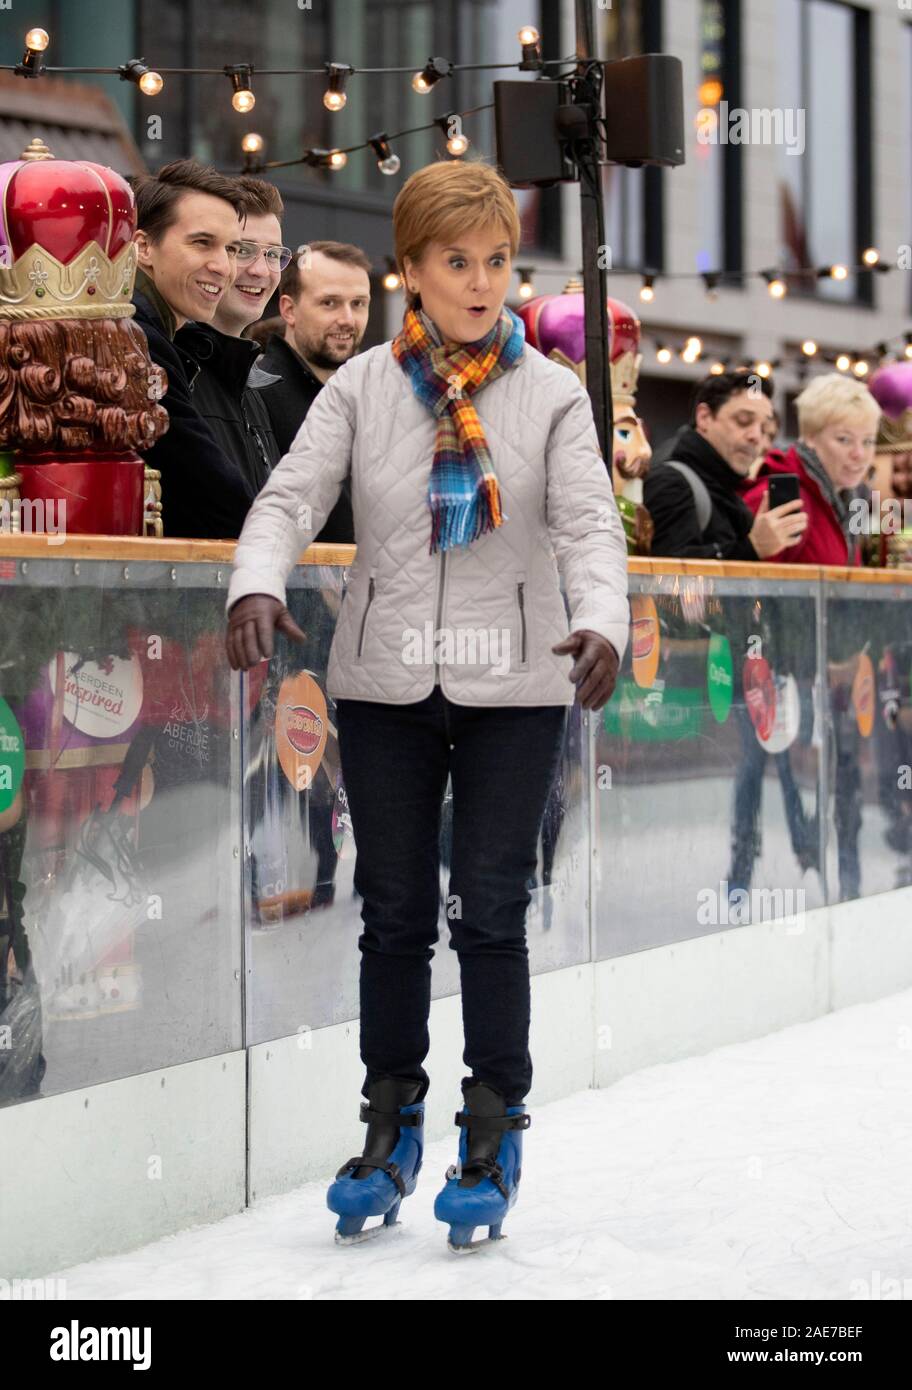 SNP leader Nicola Sturgeon ice skates during a visit to the Aberdeen Christmas Market in The Quad, Marischal College, on the General Election campaign trail. Stock Photo